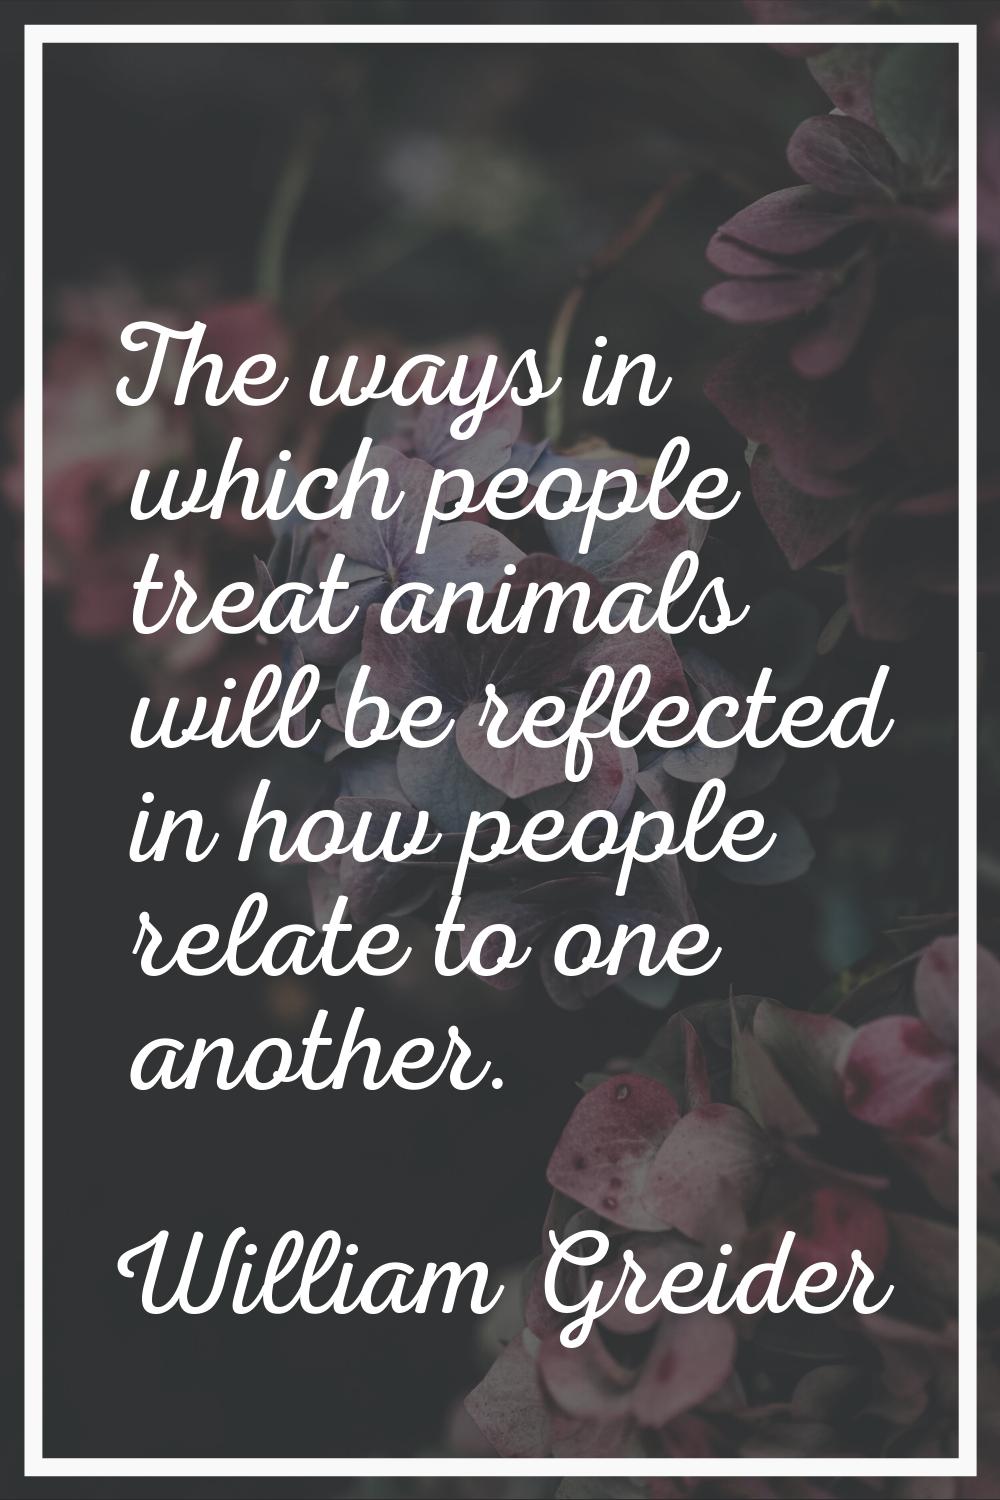 The ways in which people treat animals will be reflected in how people relate to one another.